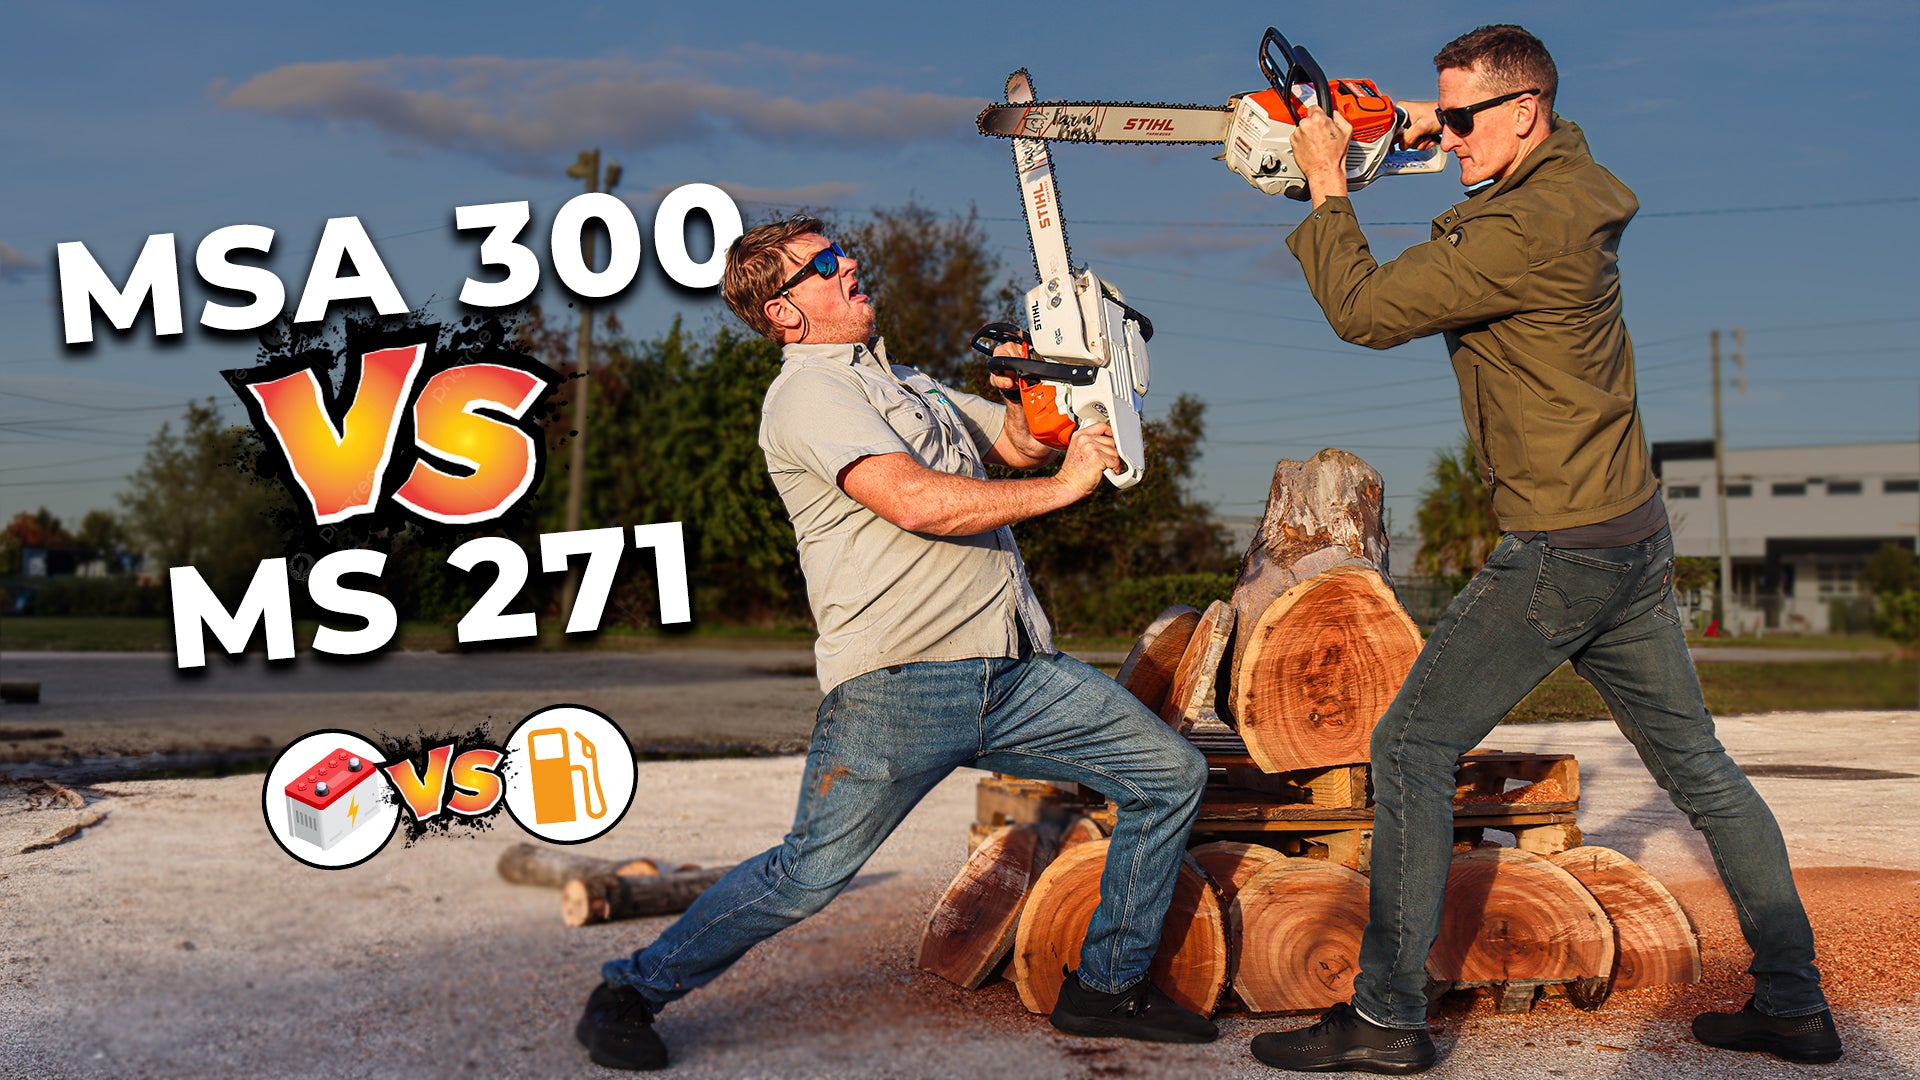 Battery Chainsaw that's as strong as GAS: STIHL MSA300 vs MS271